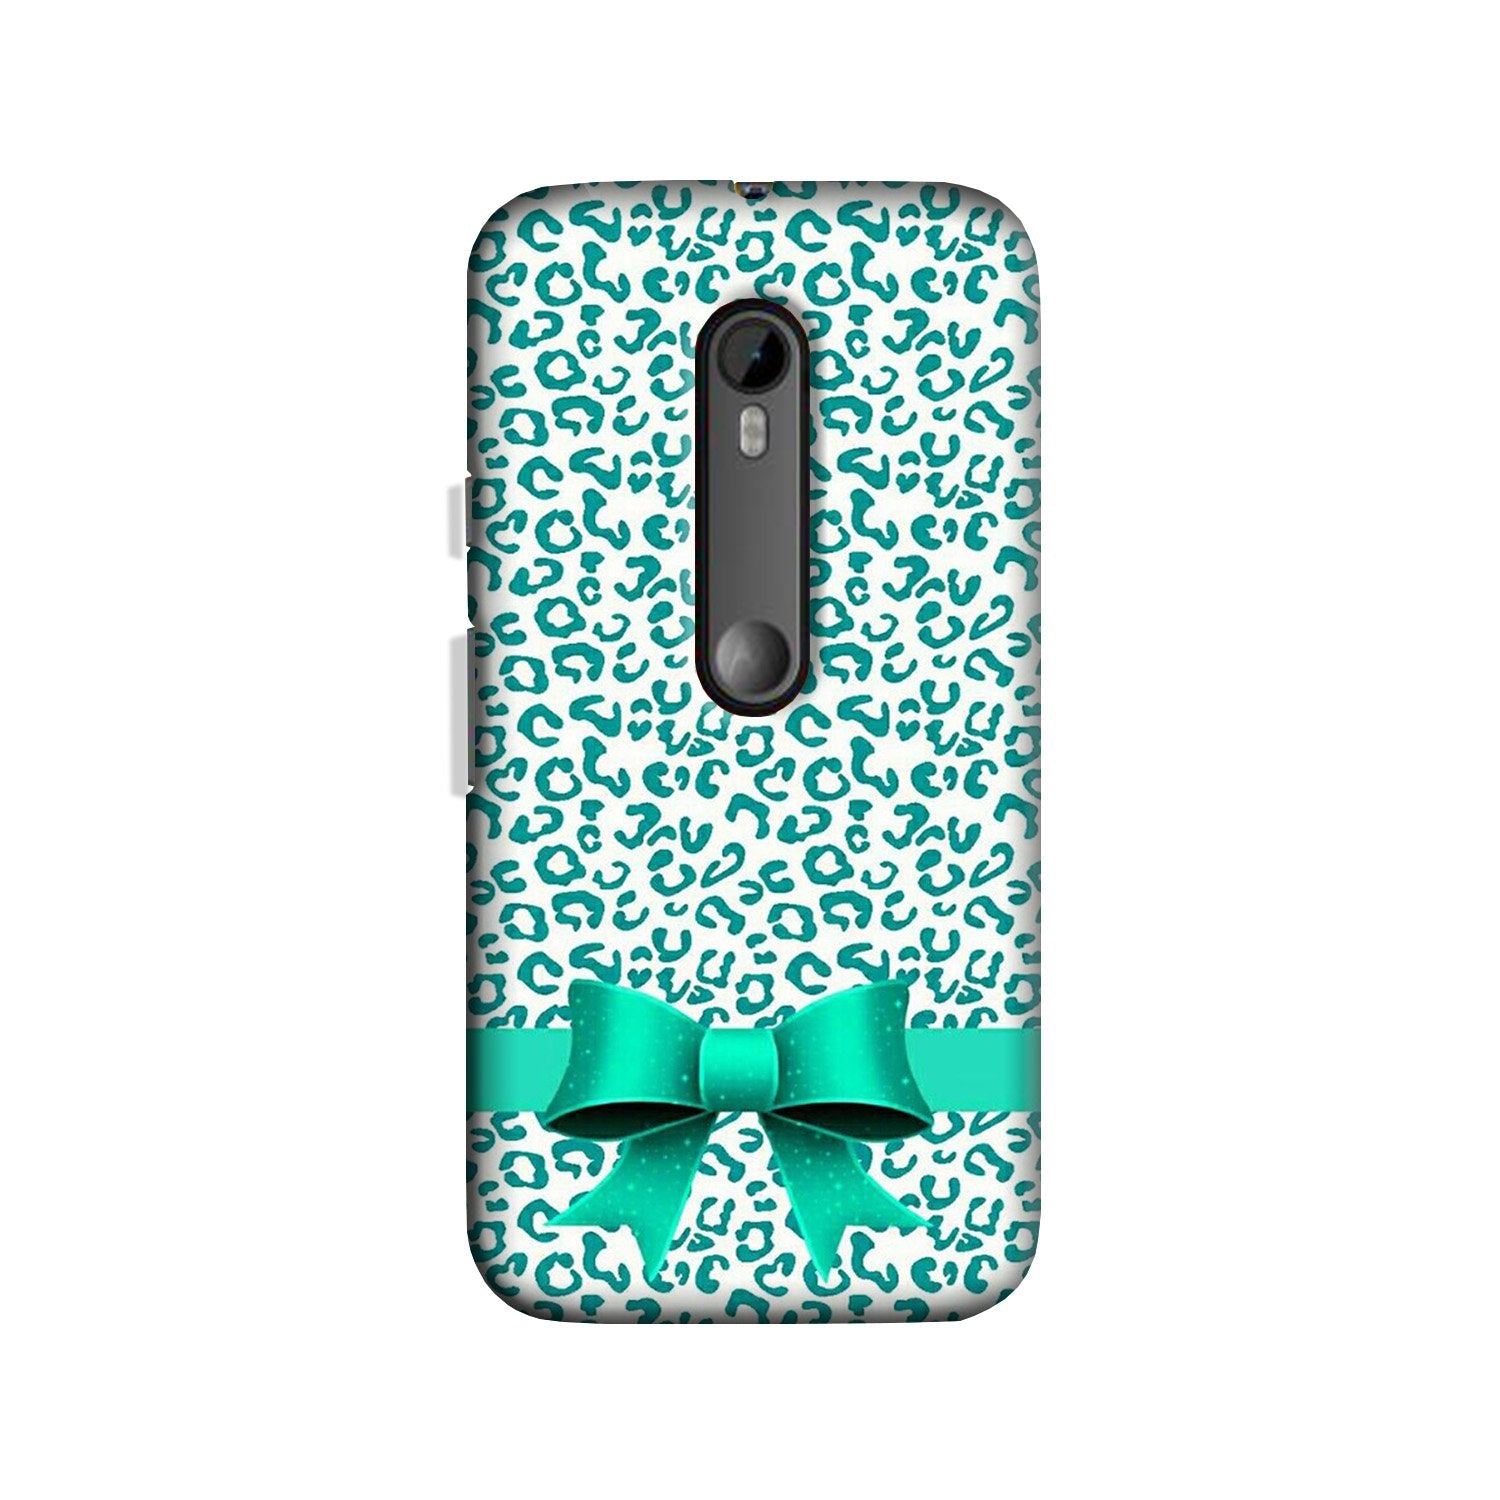 Gift Wrap6 Case for Moto X Style